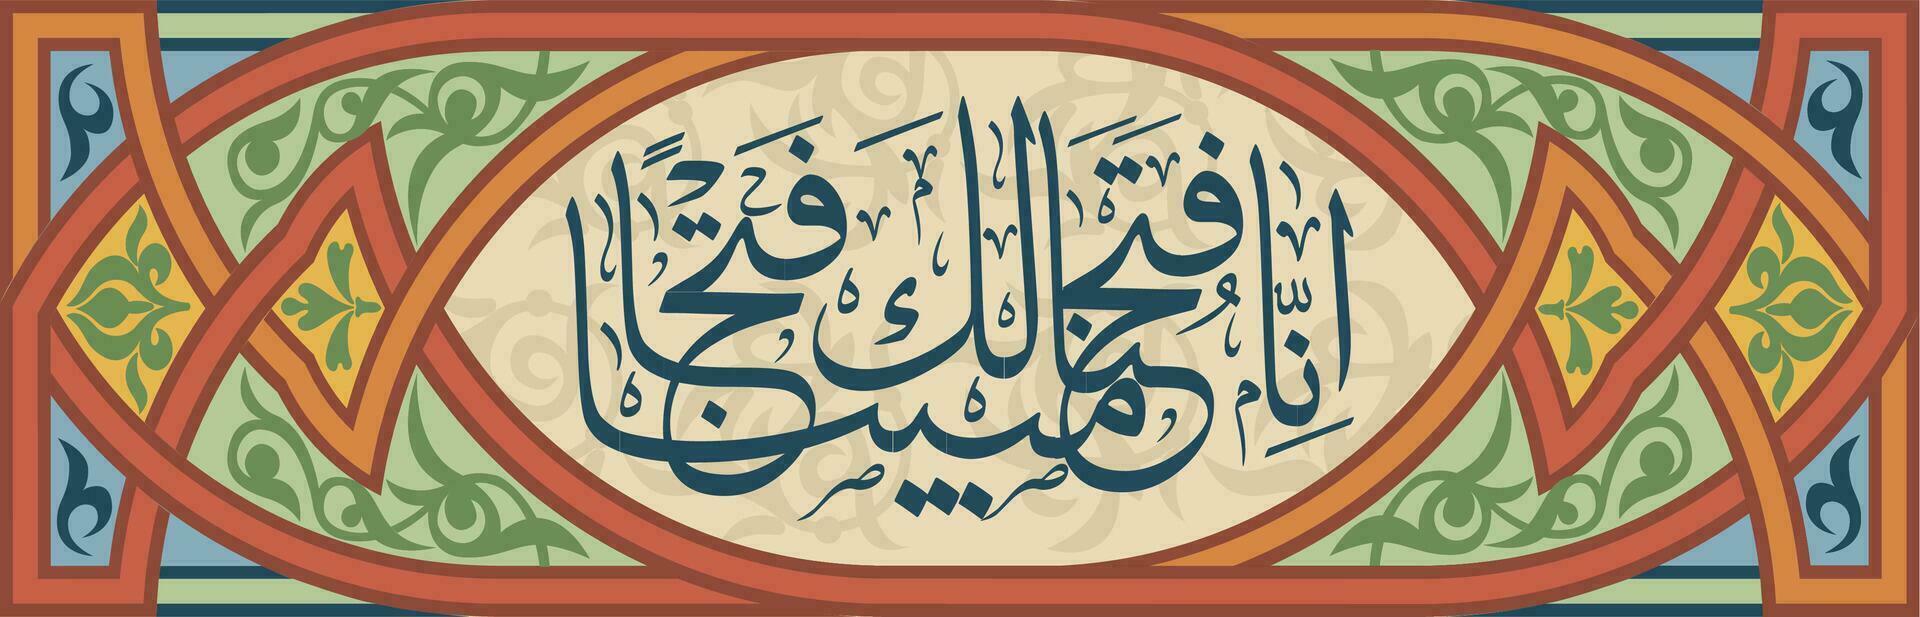 Arabic ornaments and calligraphy from the Koran, translation of Indeed, we conquered for you a real conquest vector